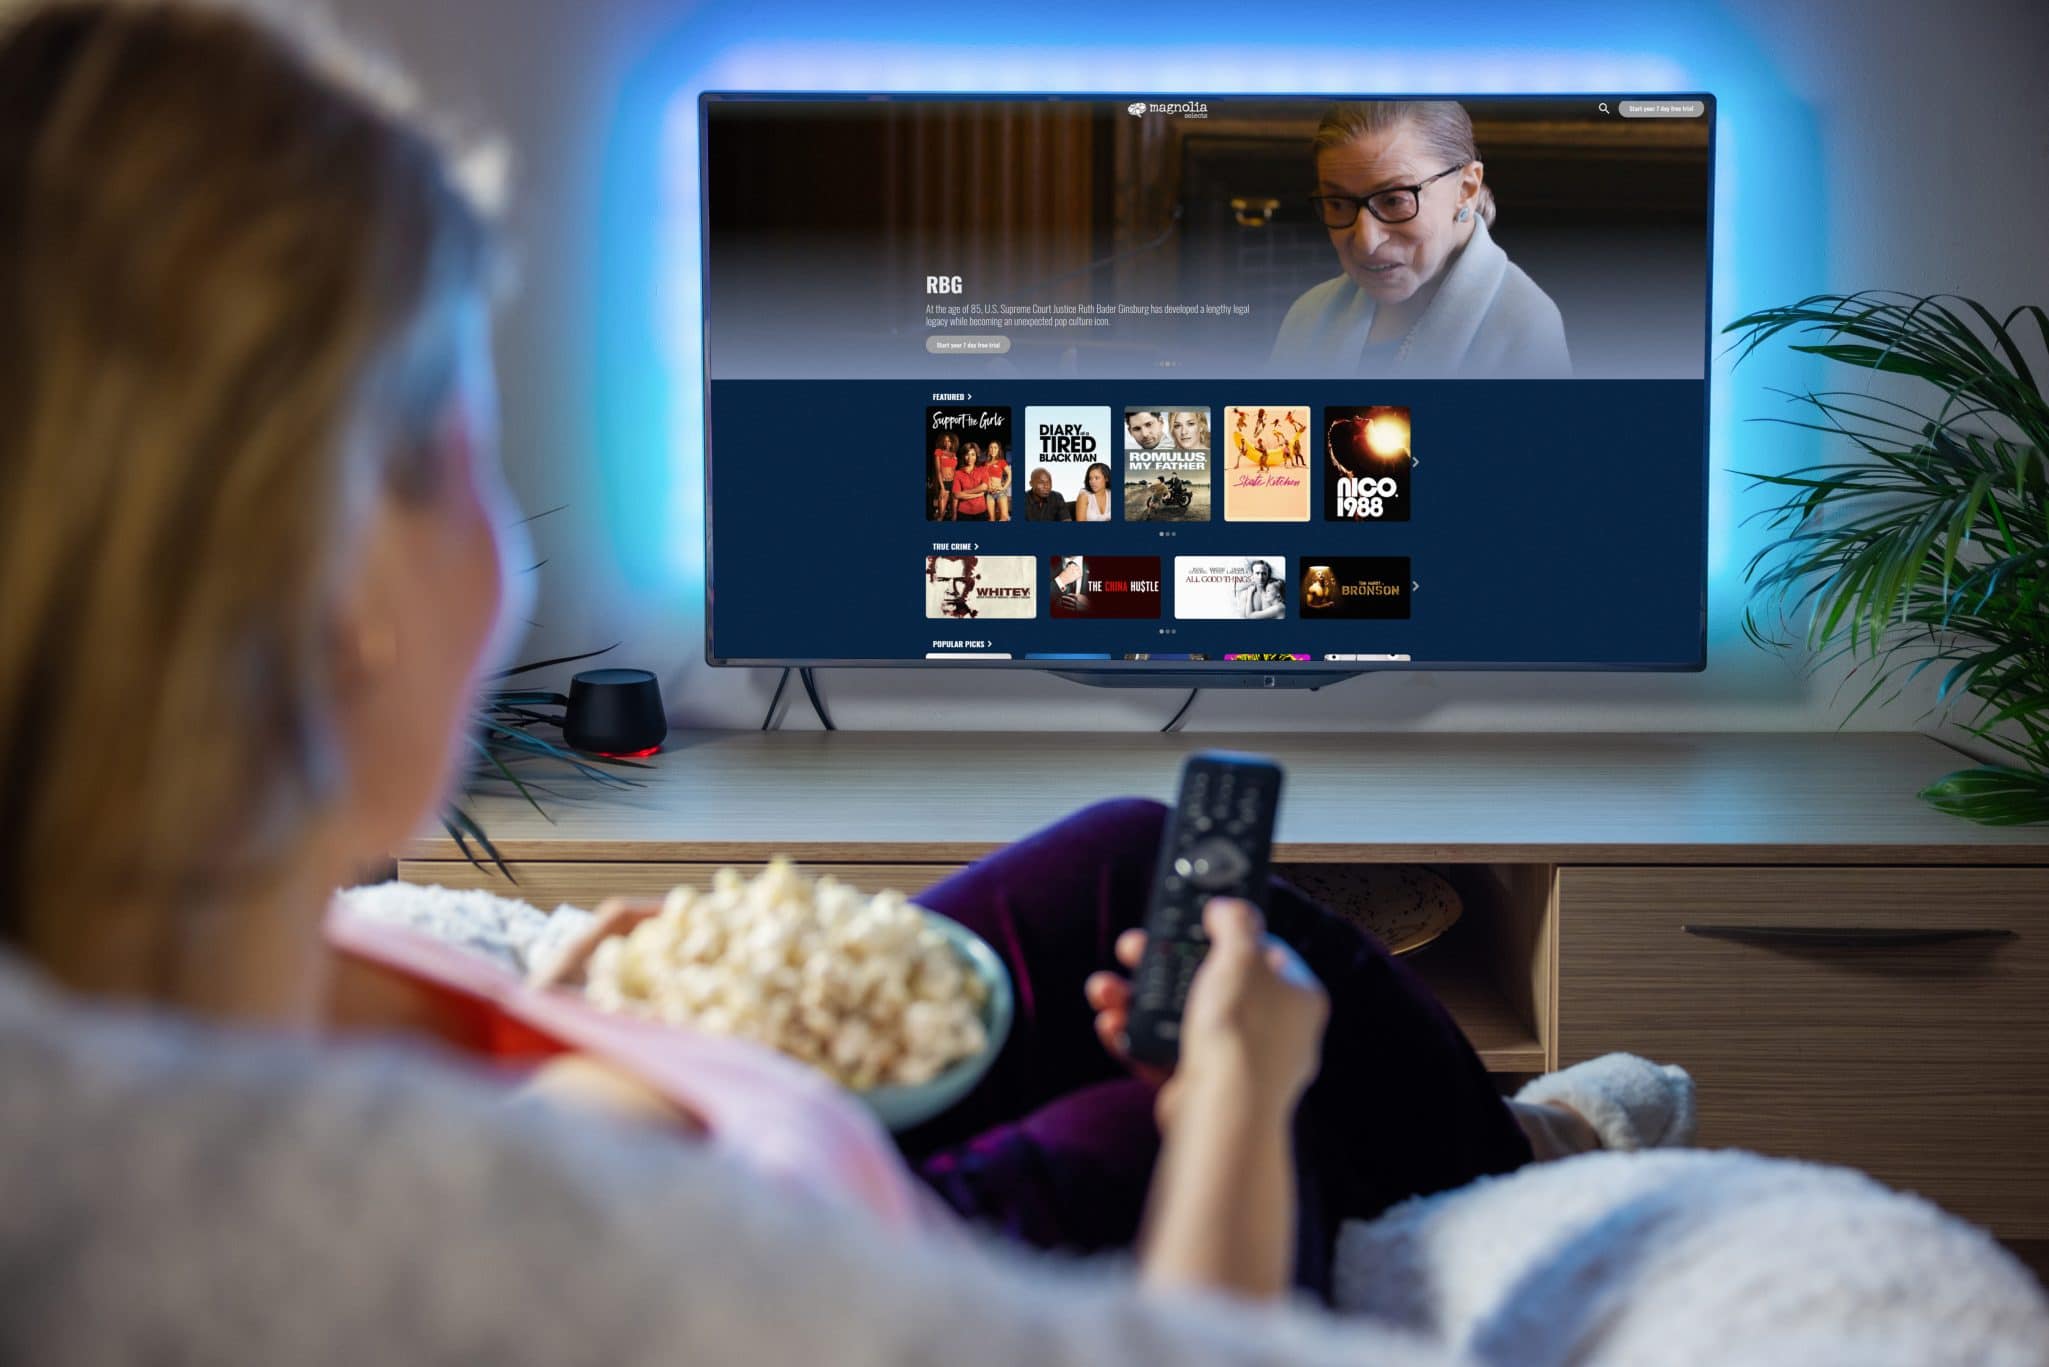 The consumer OTT streaming experience using the Ateliere Discover platform scaled